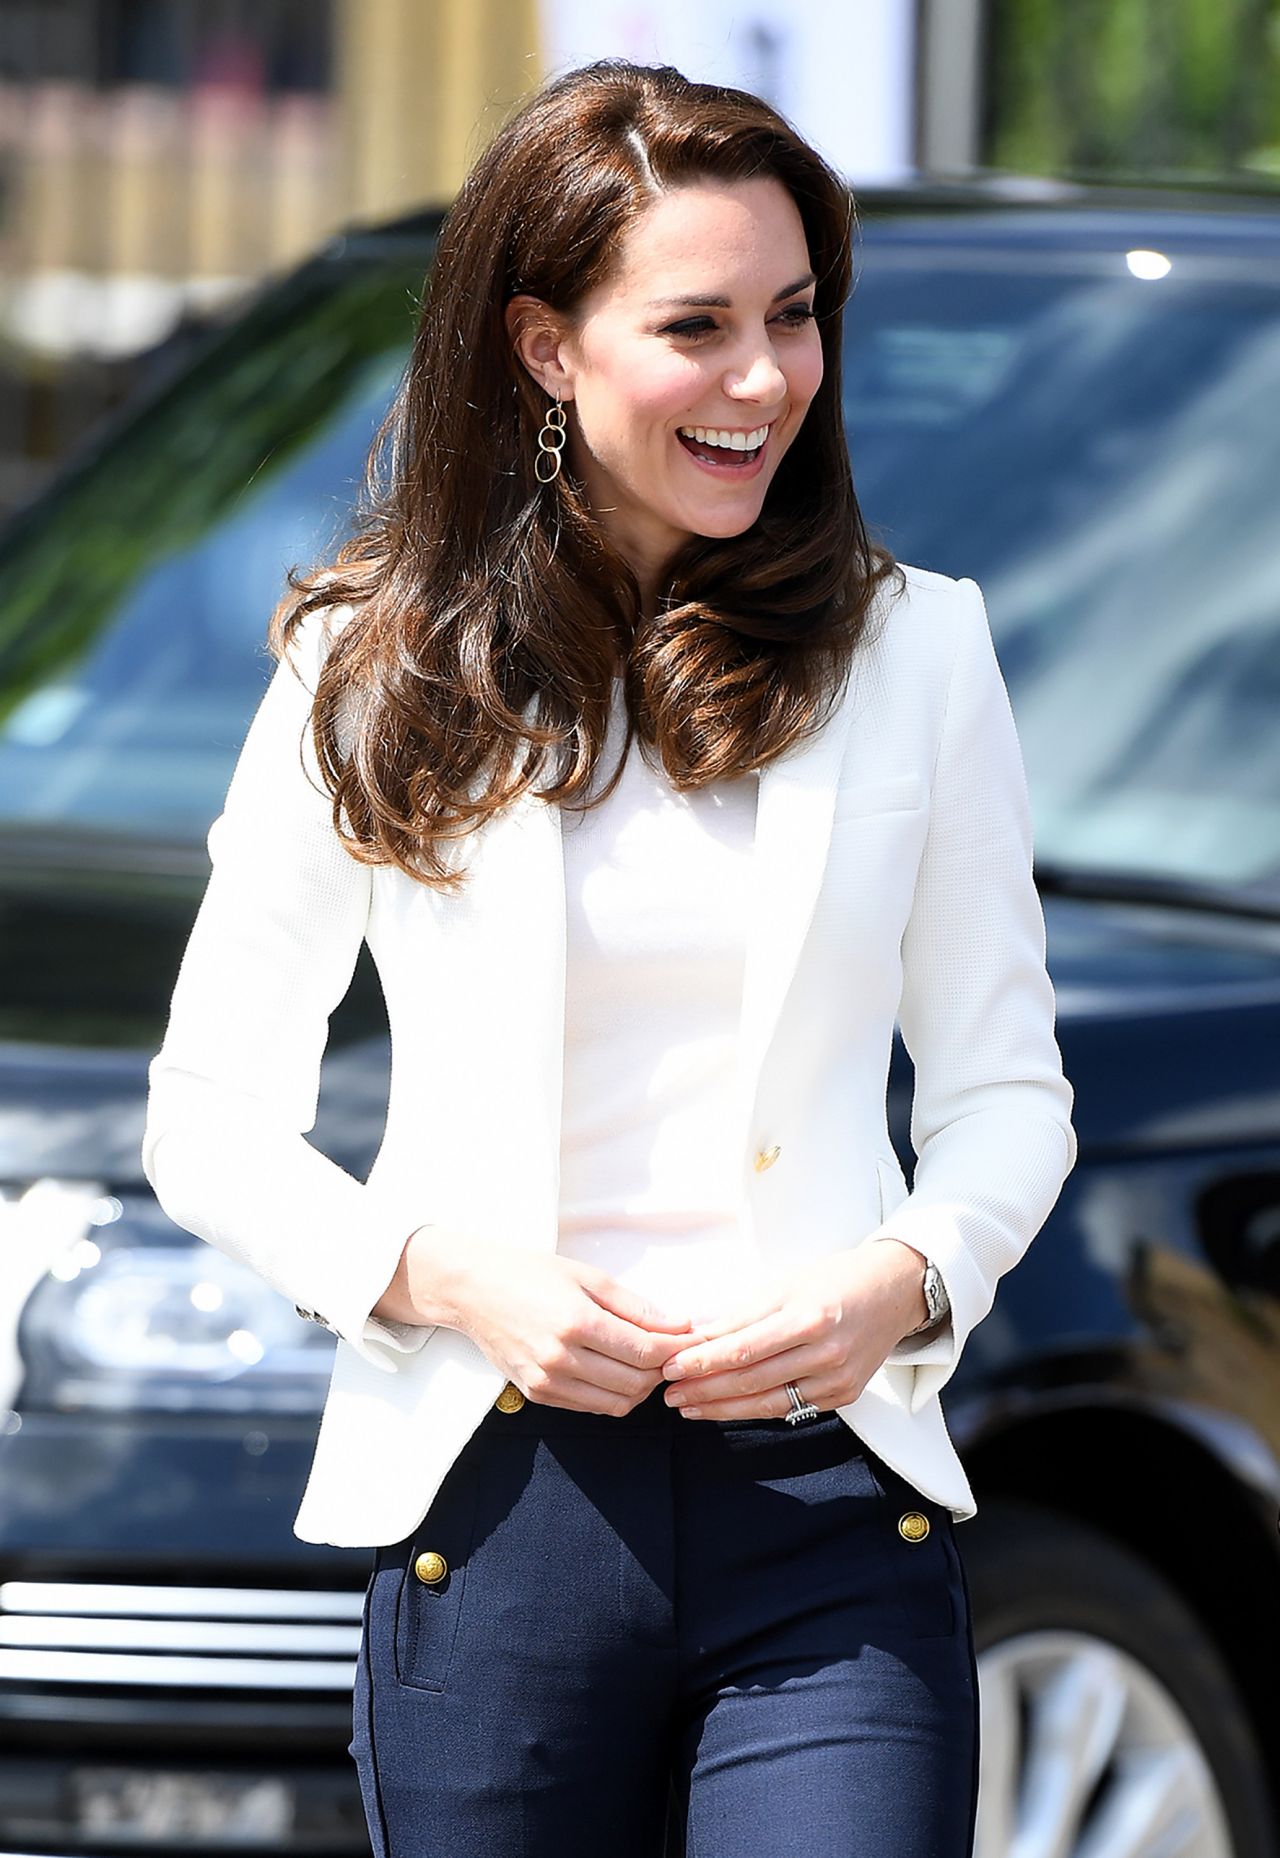 kate-middleton-visits-the-1851-trust-roadshow-in-london-06-16-2017-2.